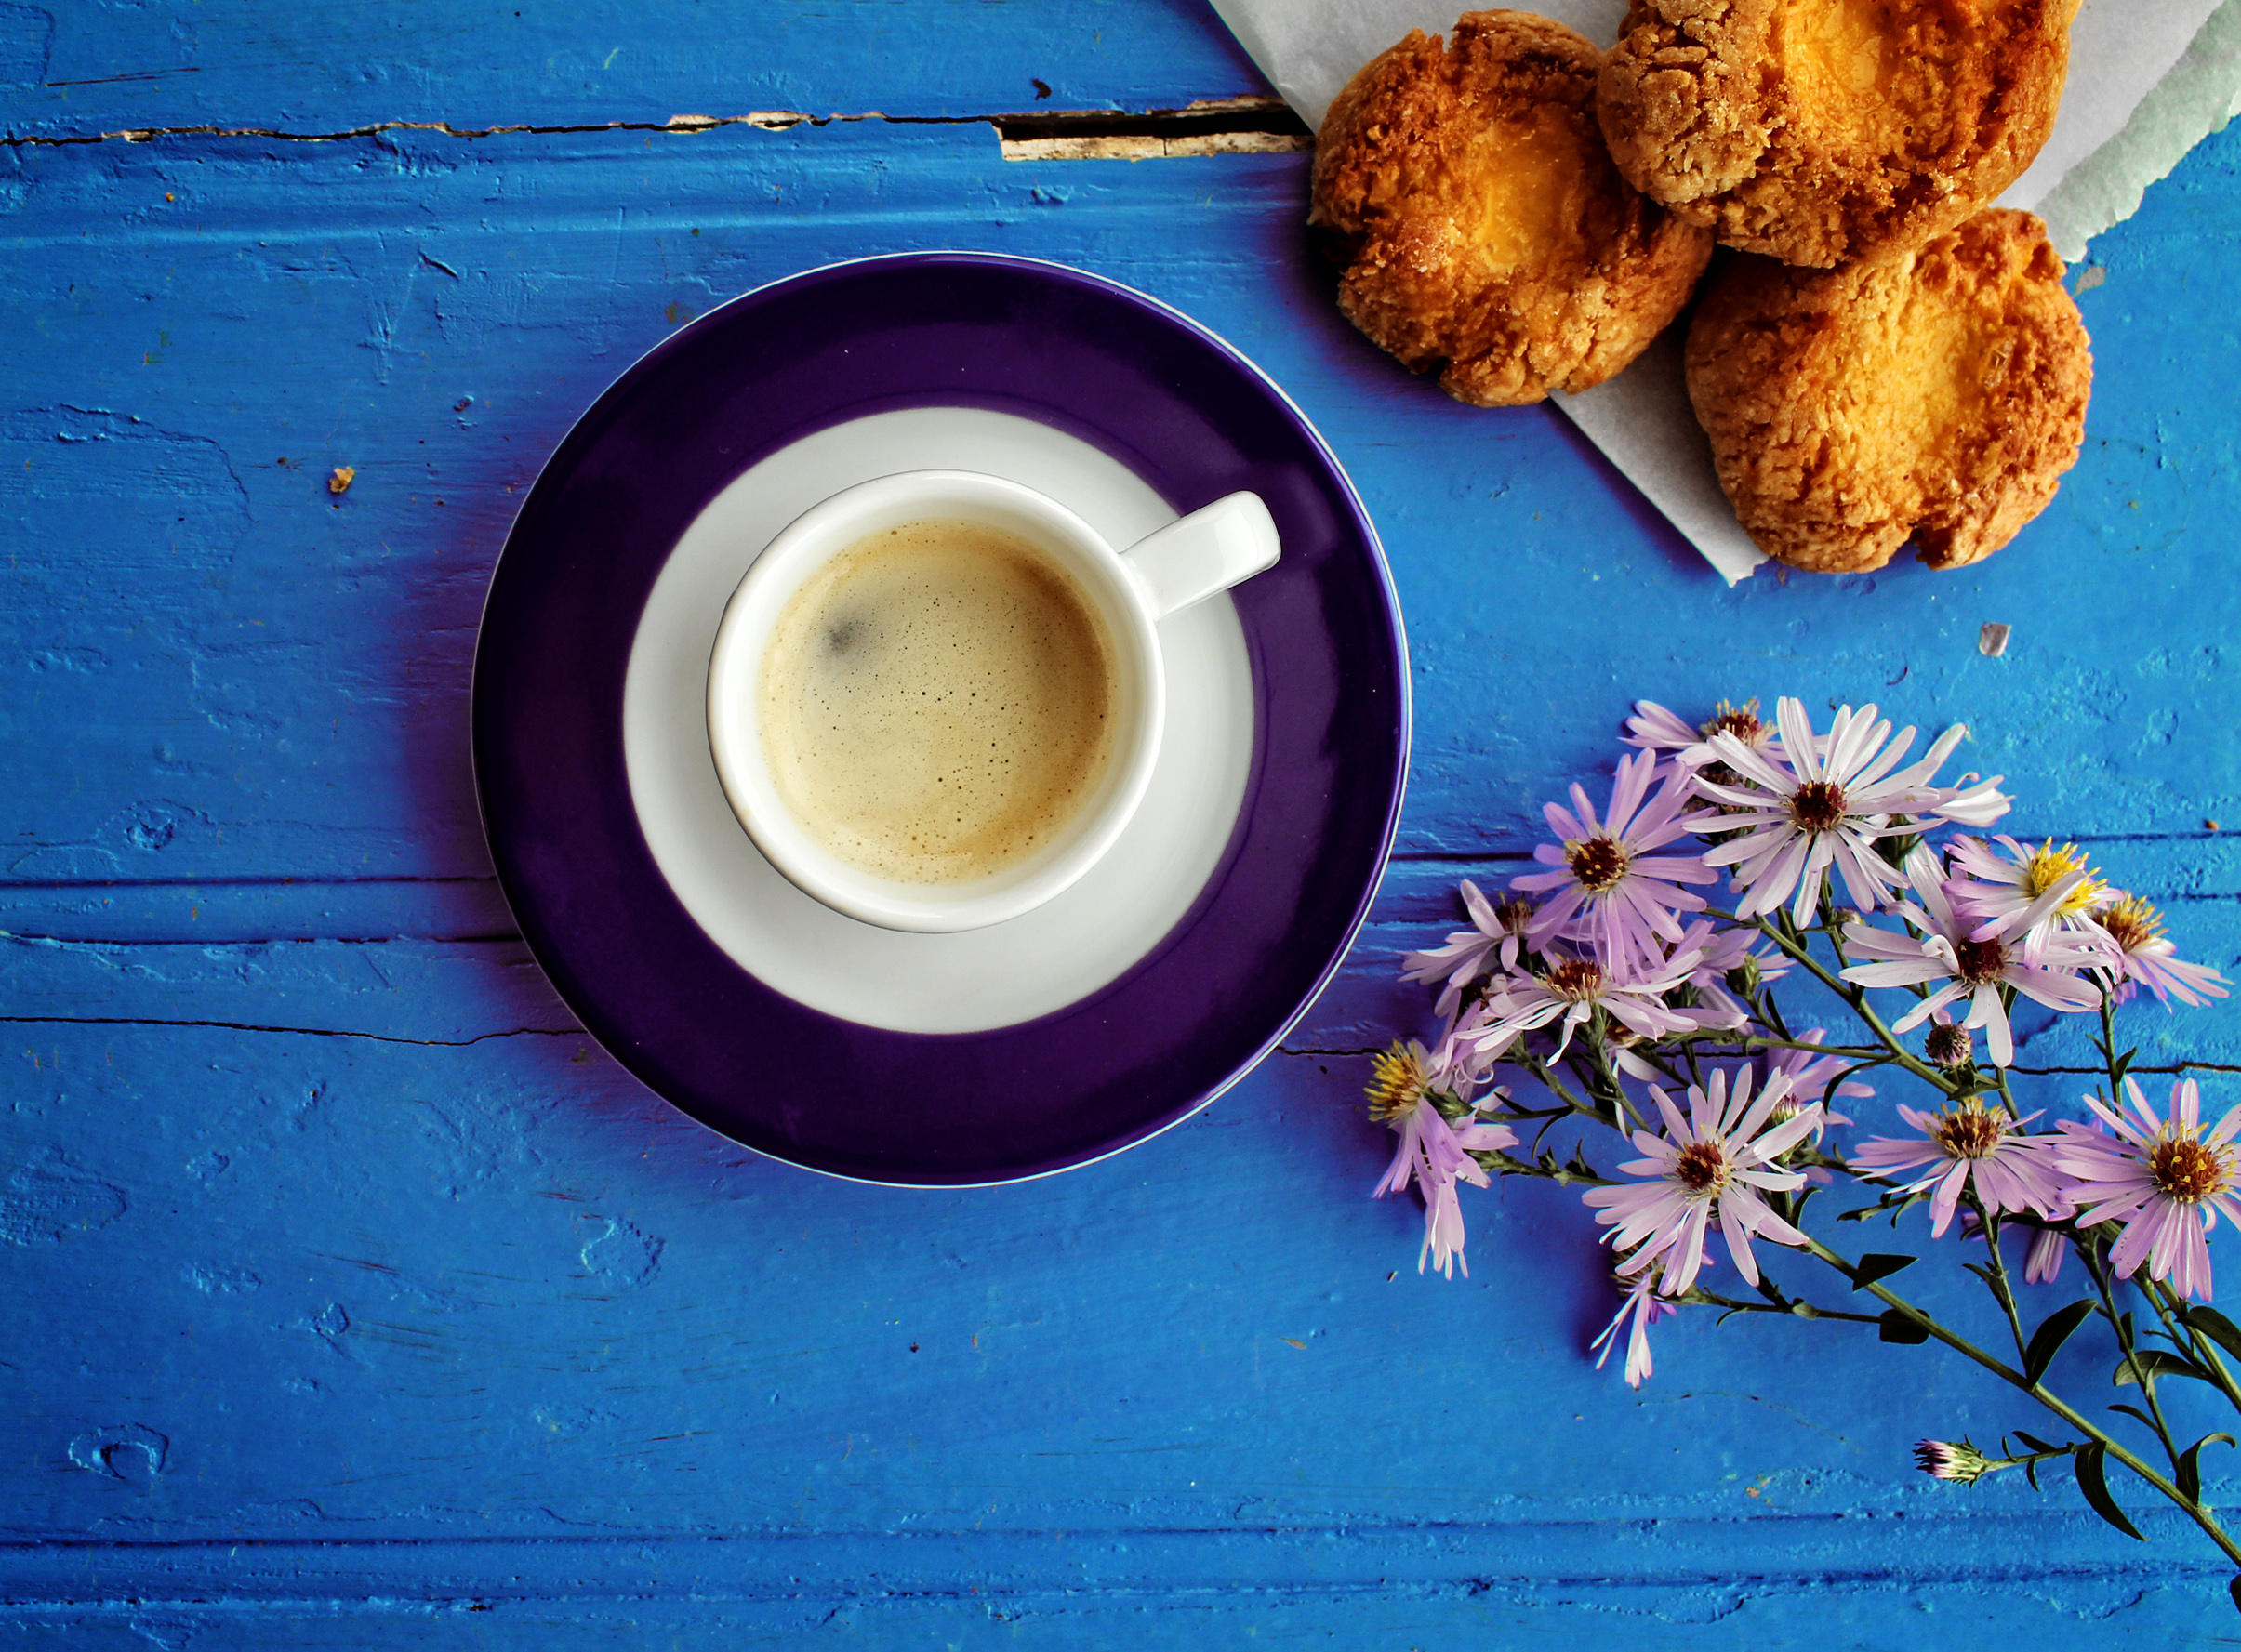 Morning glory - A delicious coffee and cookie breakfast at the farm, Addiction, Mug, Plate, Plants, HQ Photo